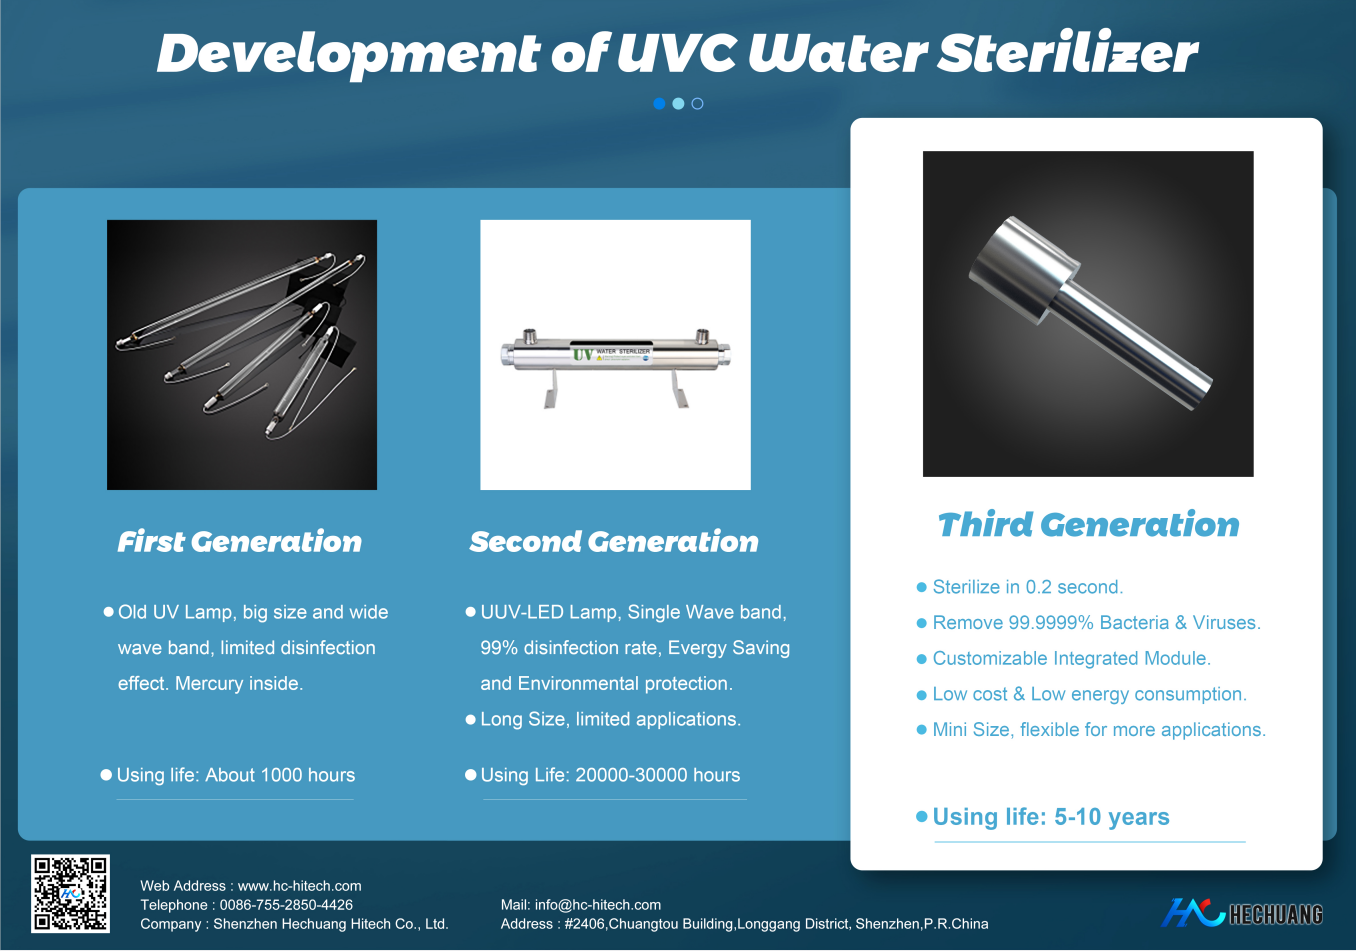 The Development history of UVC Water SterilizerRemove 99.999% bacteria and viruses from your water!www.hc-hitech.com